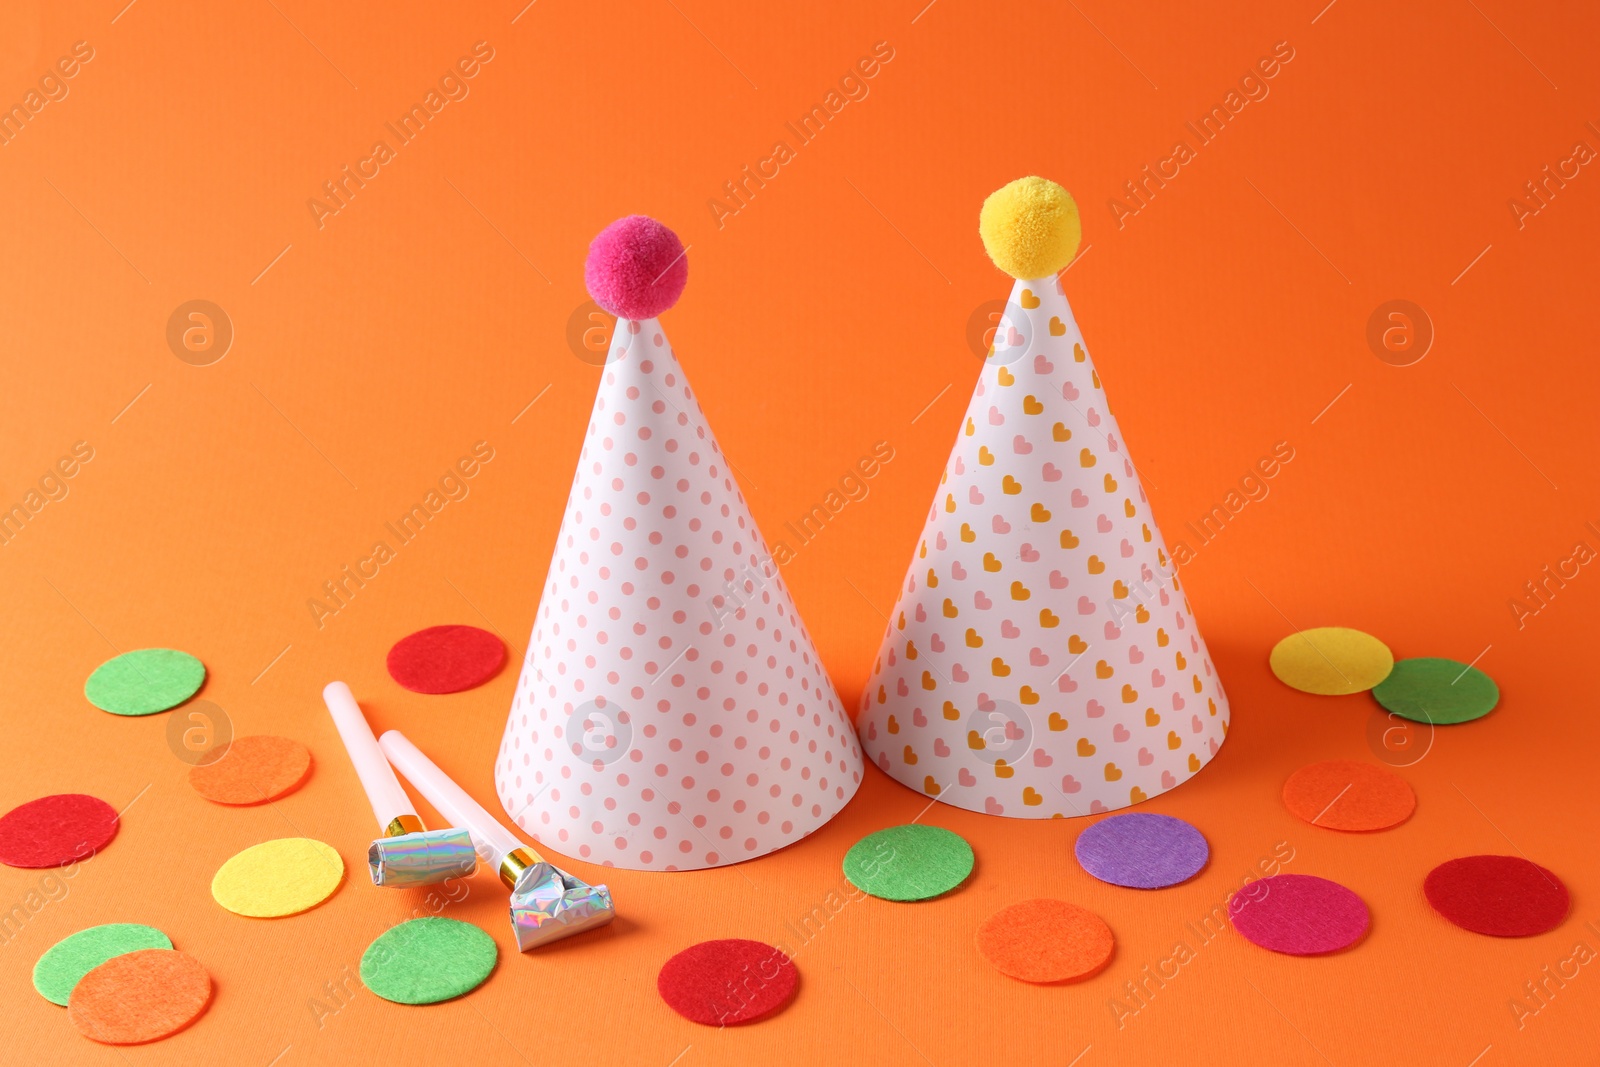 Photo of Party hats and other bright decor elements on orange background